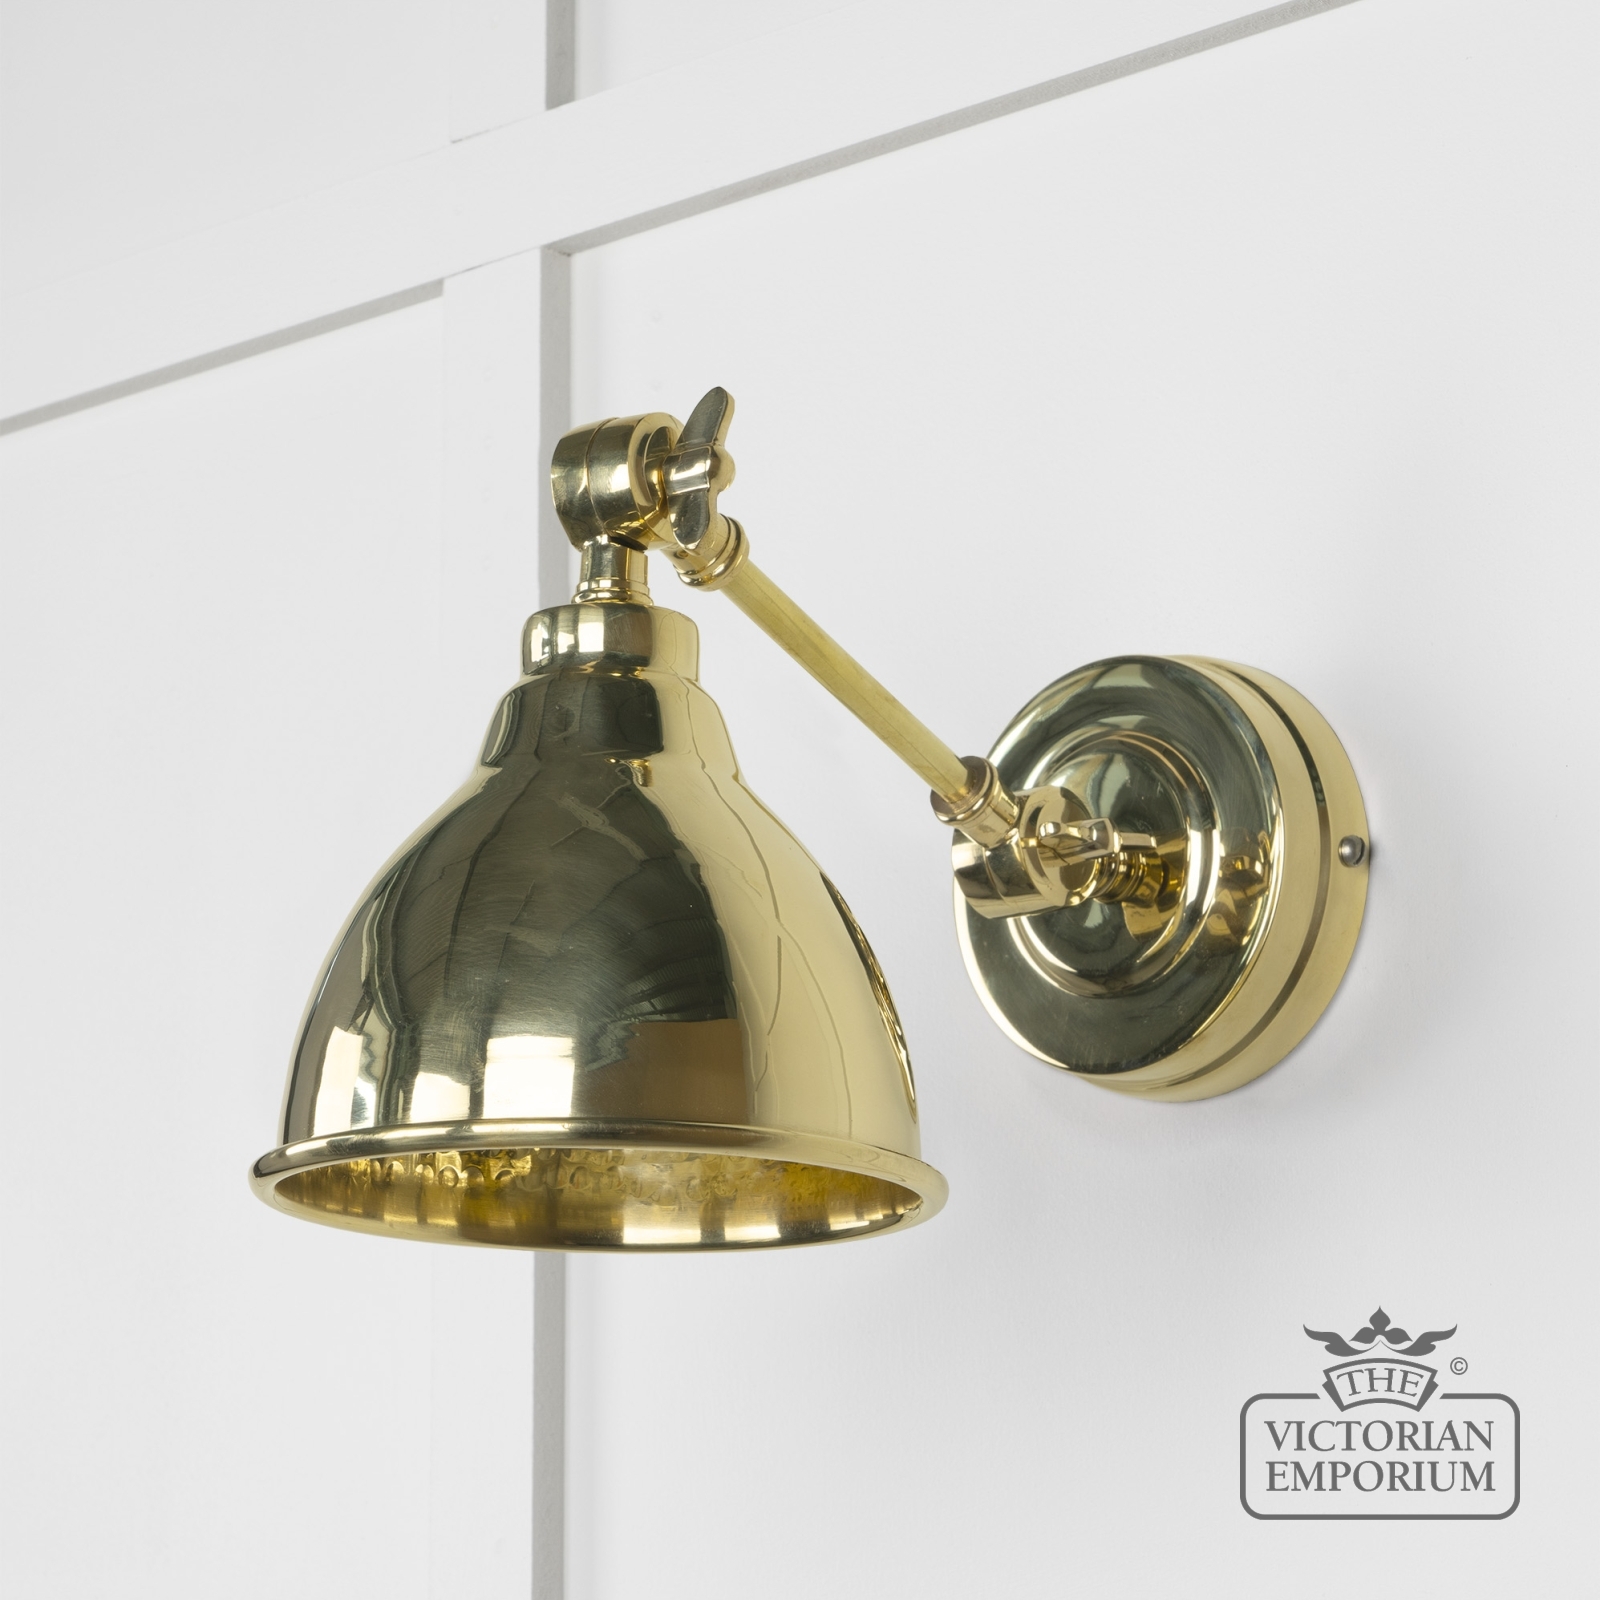 Brindle Wall Light in Hammered Brass